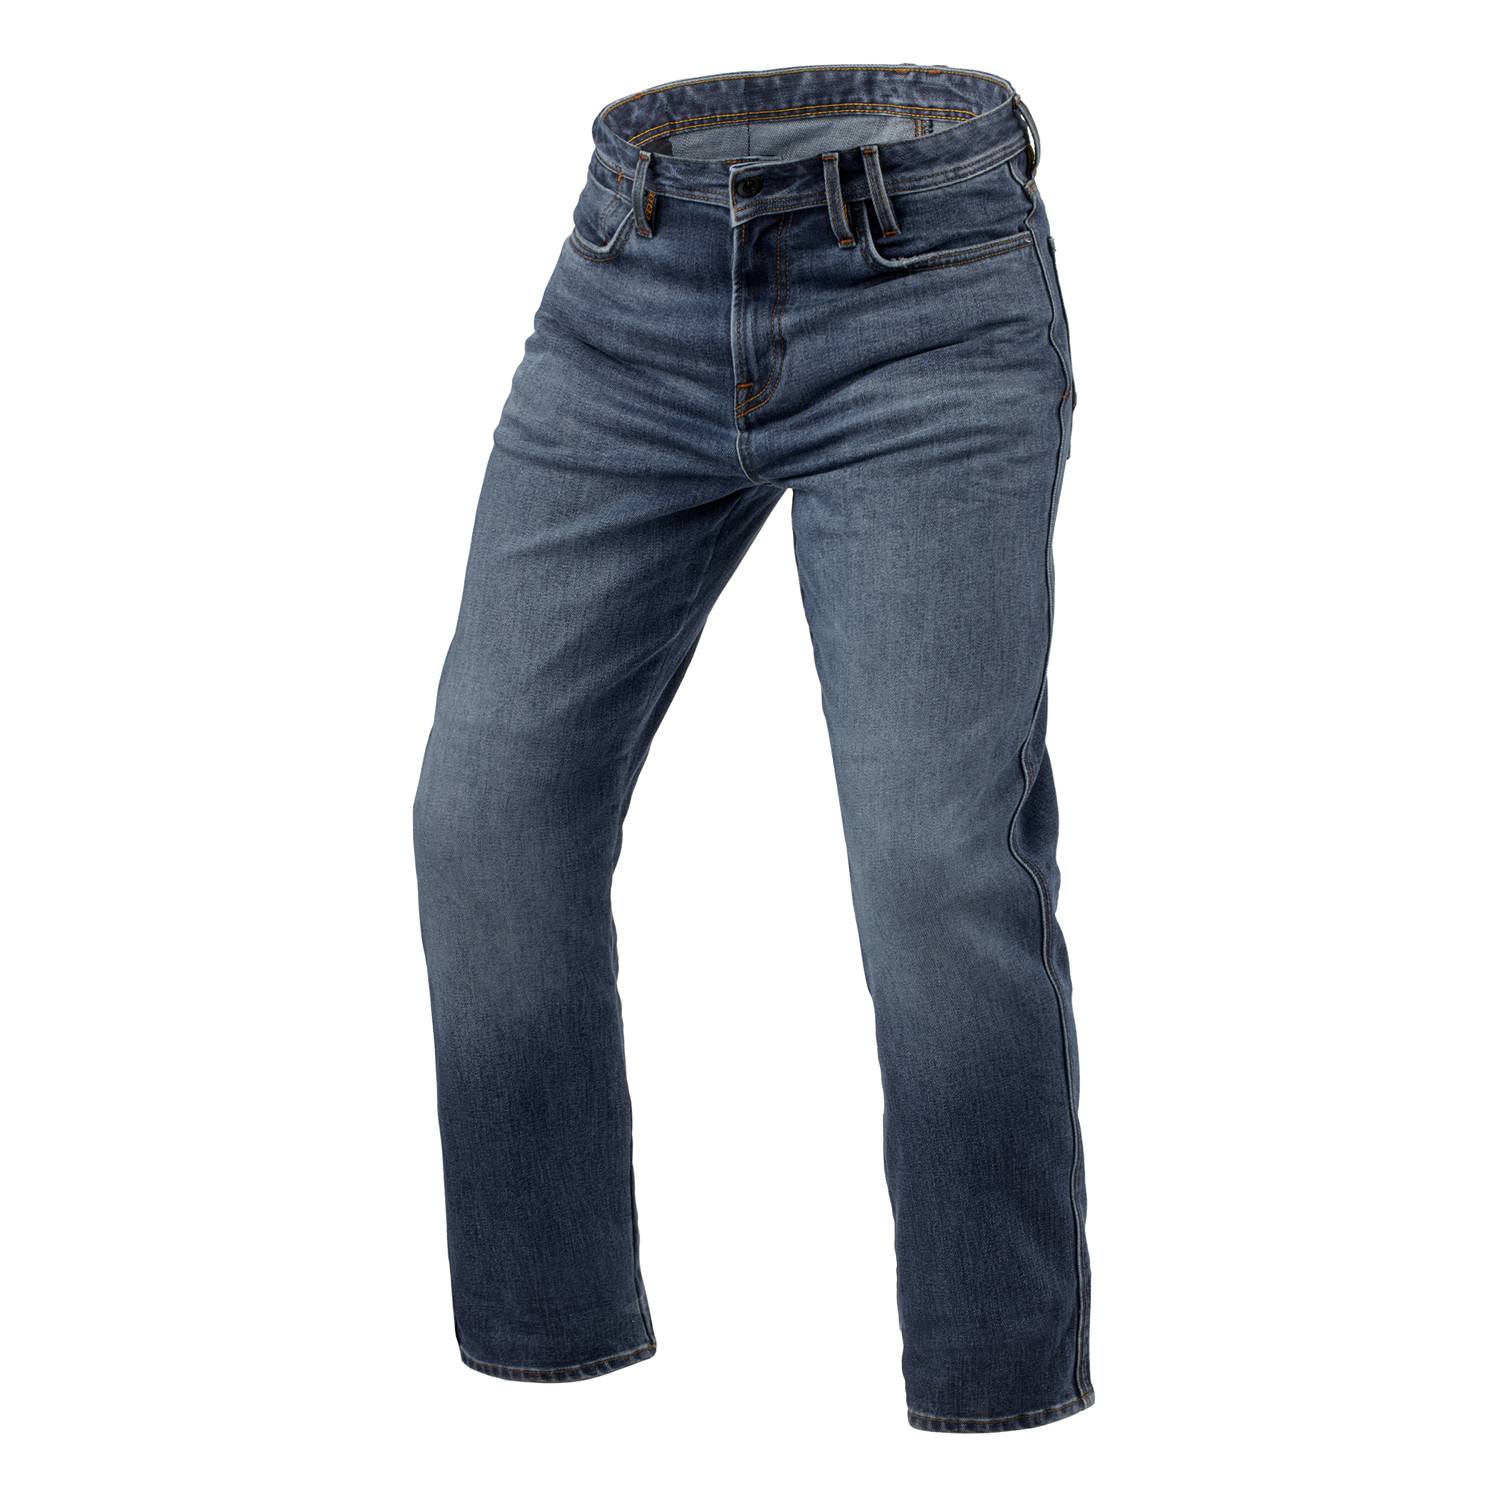 Image of EU REV'IT! Jeans Lombard 3 RF Mid Blue Stone L32 Motorcycle Jeans Taille L32/W28